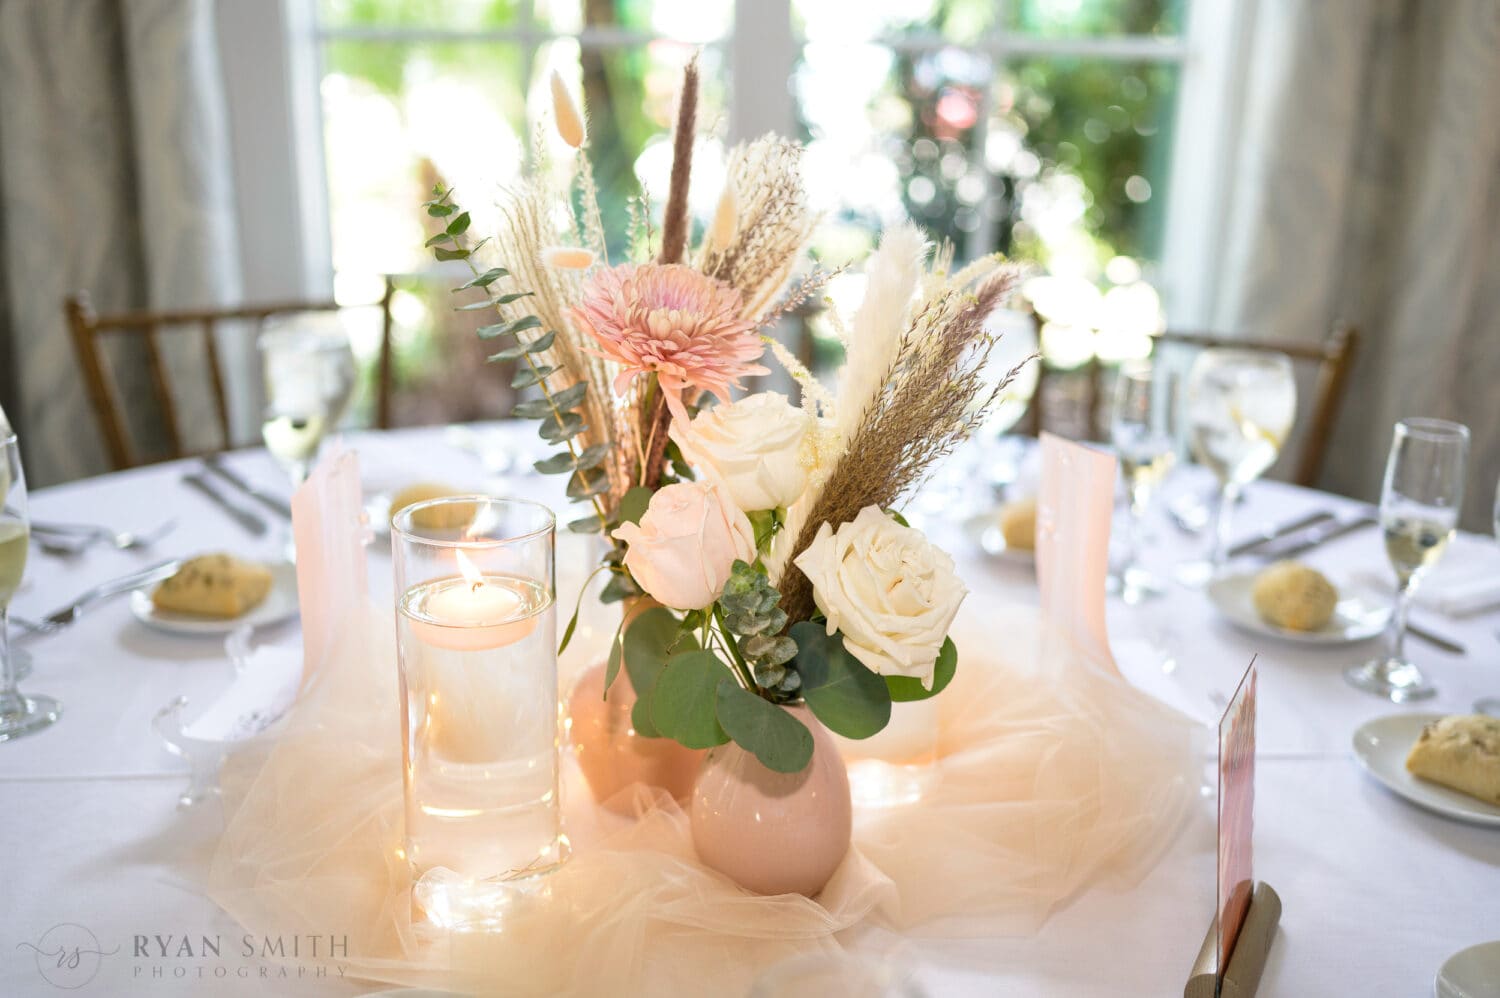 Beautiful table flower decorations - 21 Main Events